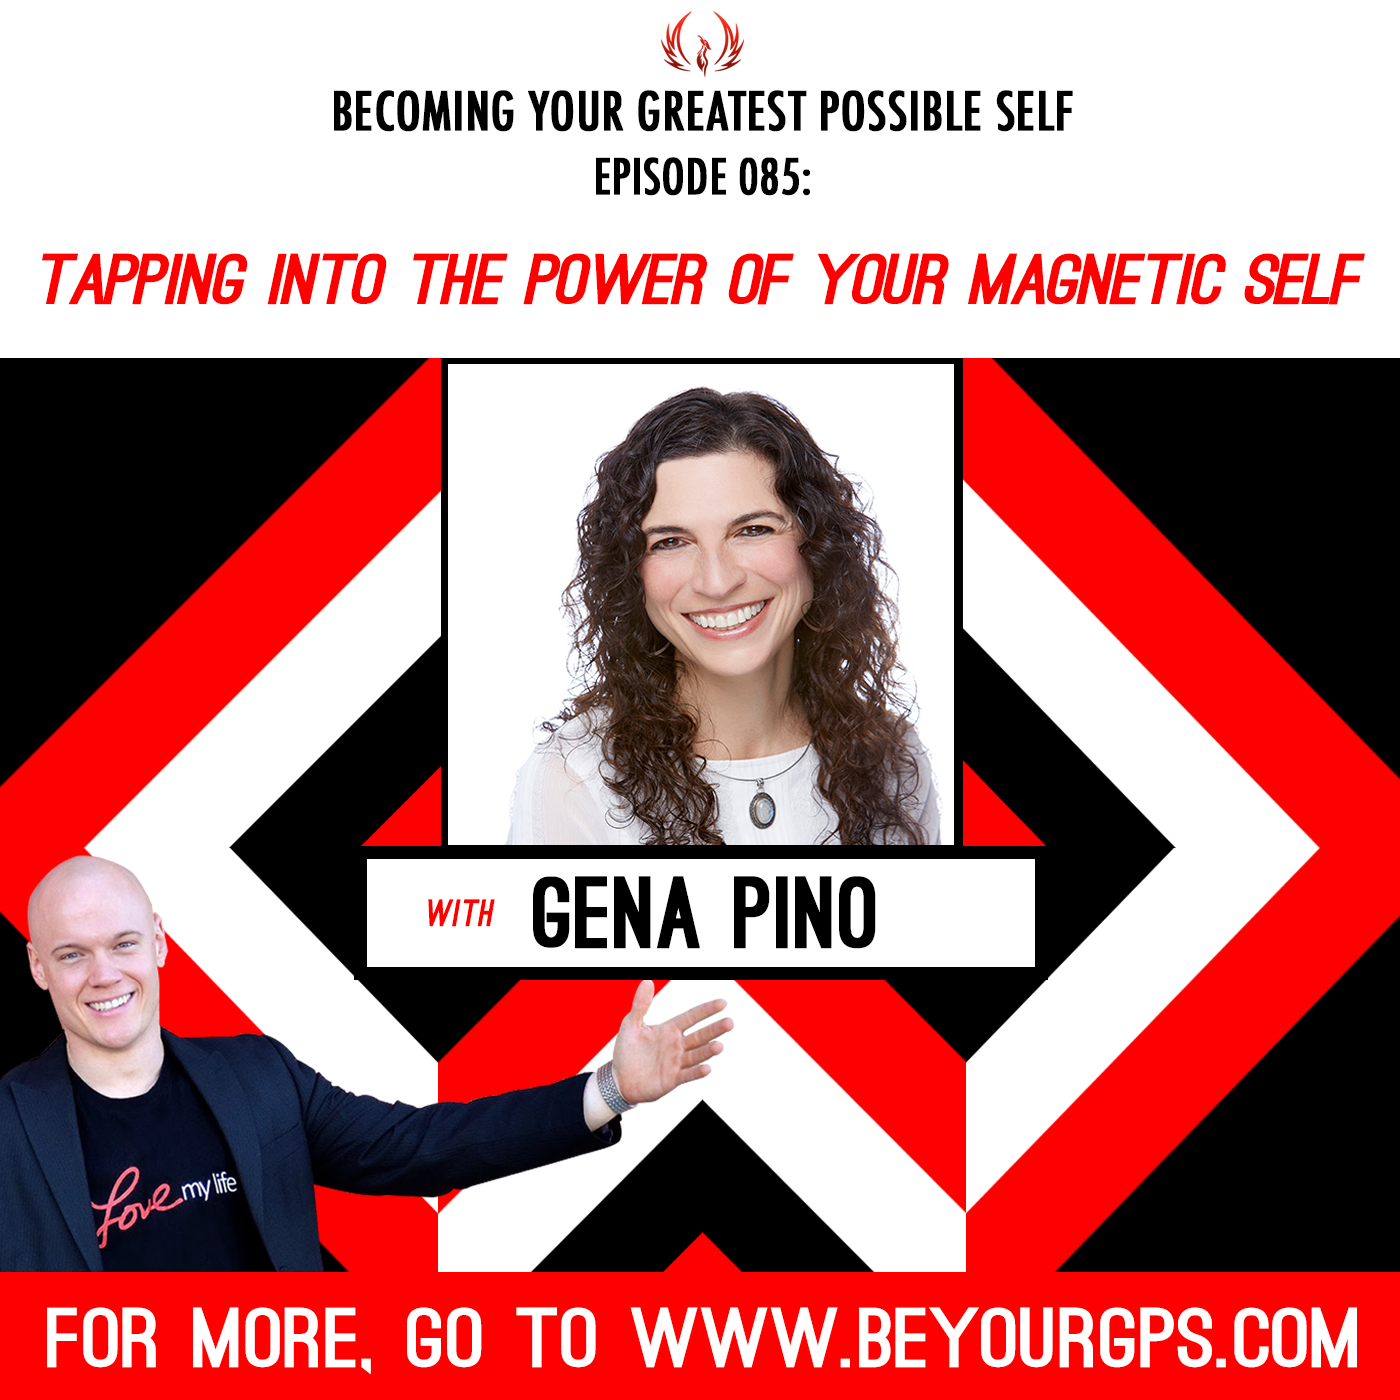 Tapping Into The Power Of Your Magnetic Self with Gena Pino